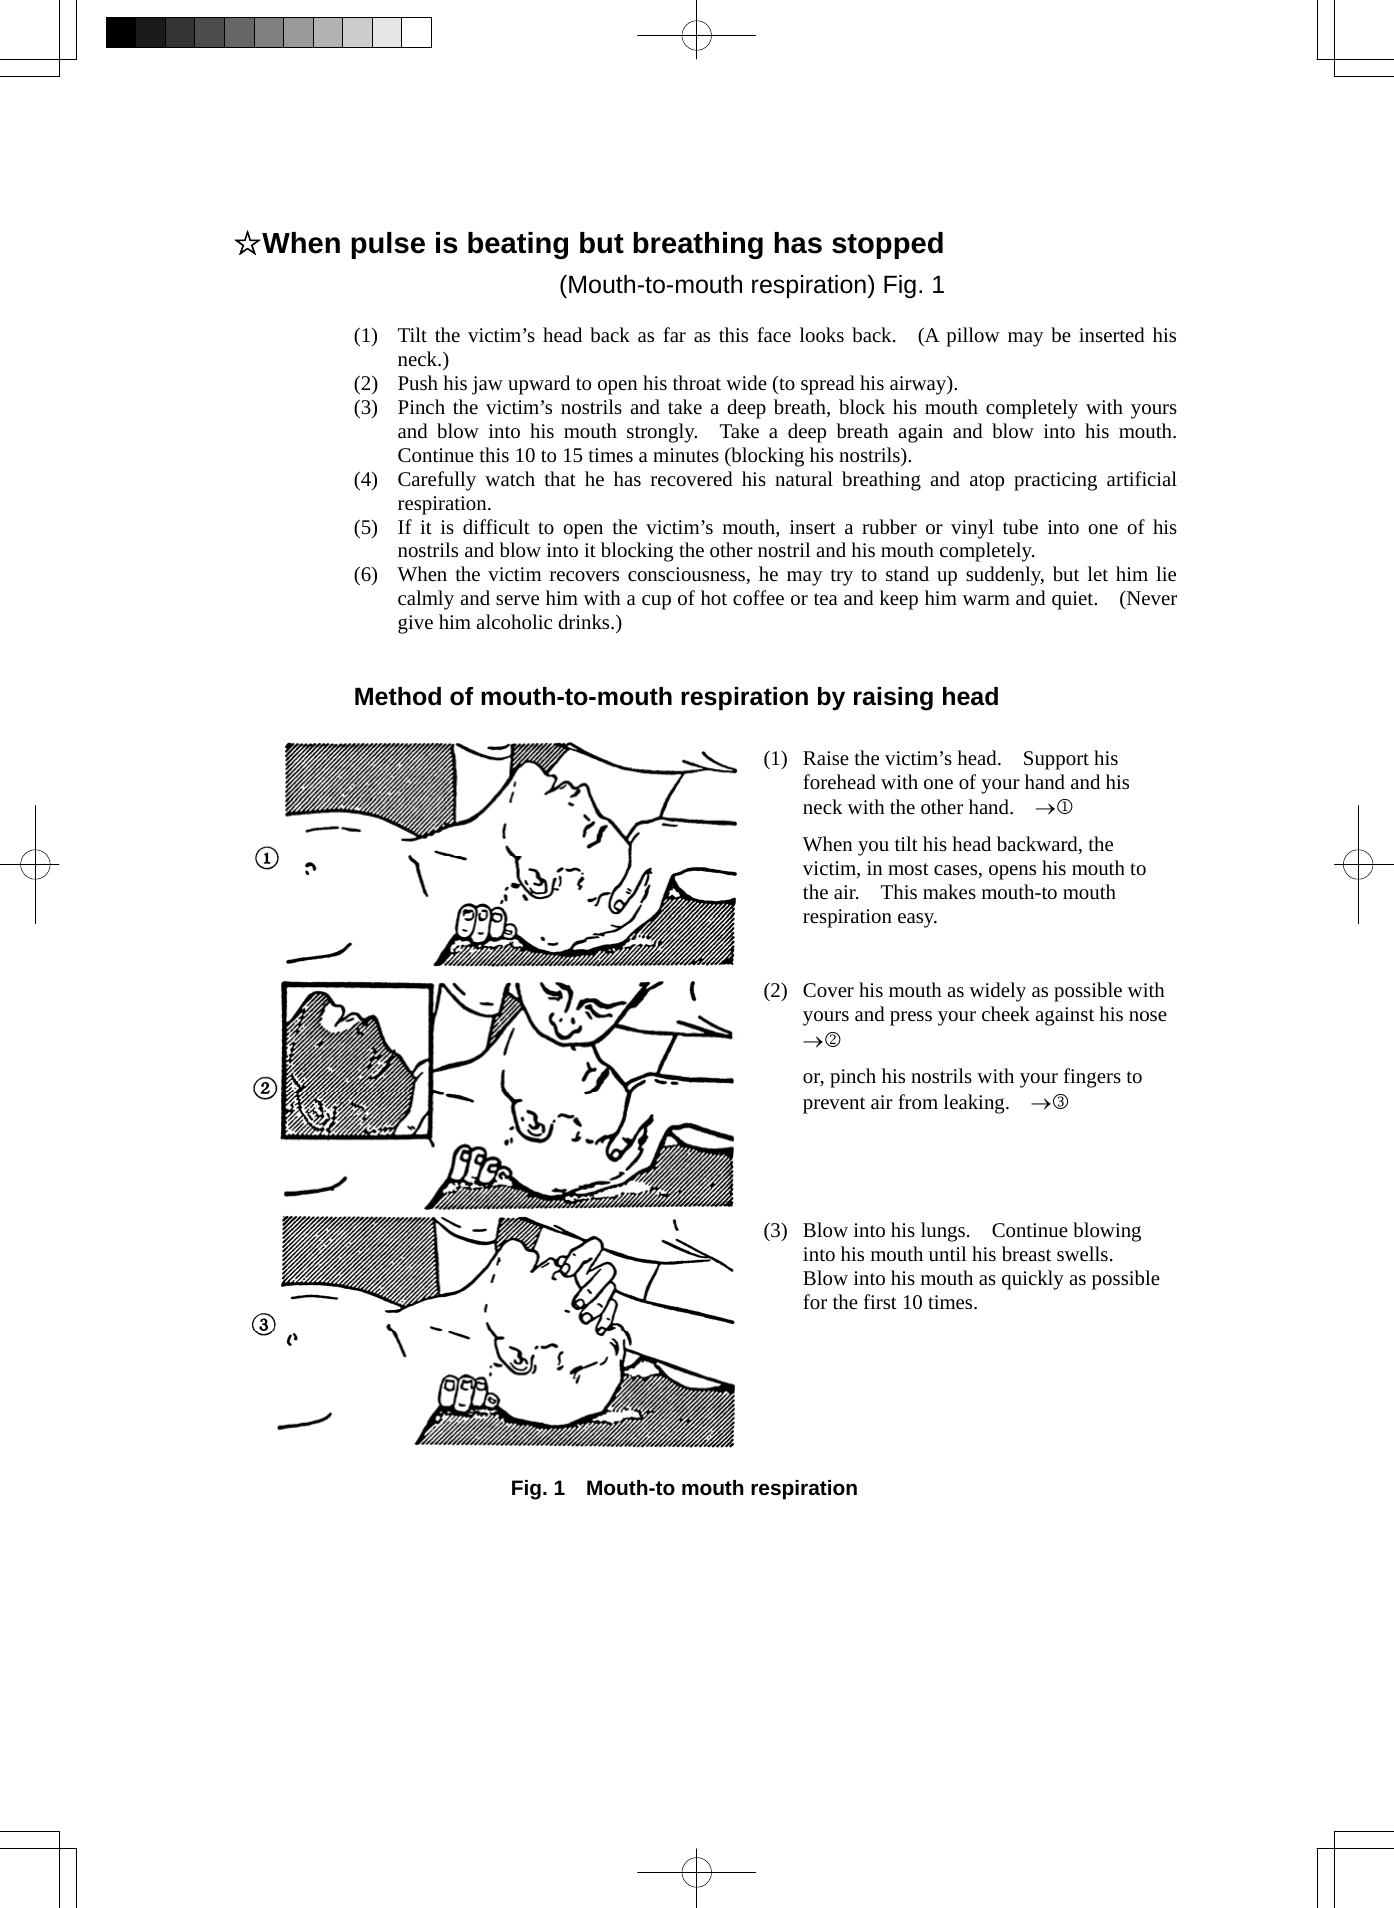  ☆When pulse is beating but breathing has stopped (Mouth-to-mouth respiration) Fig. 1  (1)  Tilt the victim’s head back as far as this face looks back.  (A pillow may be inserted his neck.) (2)  Push his jaw upward to open his throat wide (to spread his airway). (3)  Pinch the victim’s nostrils and take a deep breath, block his mouth completely with yours and blow into his mouth strongly.  Take a deep breath again and blow into his mouth.  Continue this 10 to 15 times a minutes (blocking his nostrils). (4)  Carefully watch that he has recovered his natural breathing and atop practicing artificial respiration. (5)  If it is difficult to open the victim’s mouth, insert a rubber or vinyl tube into one of his nostrils and blow into it blocking the other nostril and his mouth completely. (6)  When the victim recovers consciousness, he may try to stand up suddenly, but let him lie calmly and serve him with a cup of hot coffee or tea and keep him warm and quiet.    (Never give him alcoholic drinks.)   Method of mouth-to-mouth respiration by raising head  (1)  Raise the victim’s head.    Support his forehead with one of your hand and his neck with the other hand.    →1   When you tilt his head backward, the victim, in most cases, opens his mouth to the air.    This makes mouth-to mouth respiration easy. (2)  Cover his mouth as widely as possible with yours and press your cheek against his nose →2   or, pinch his nostrils with your fingers to prevent air from leaking.    →3 (3)  Blow into his lungs.    Continue blowing into his mouth until his breast swells.   Blow into his mouth as quickly as possible for the first 10 times.  Fig. 1    Mouth-to mouth respiration   